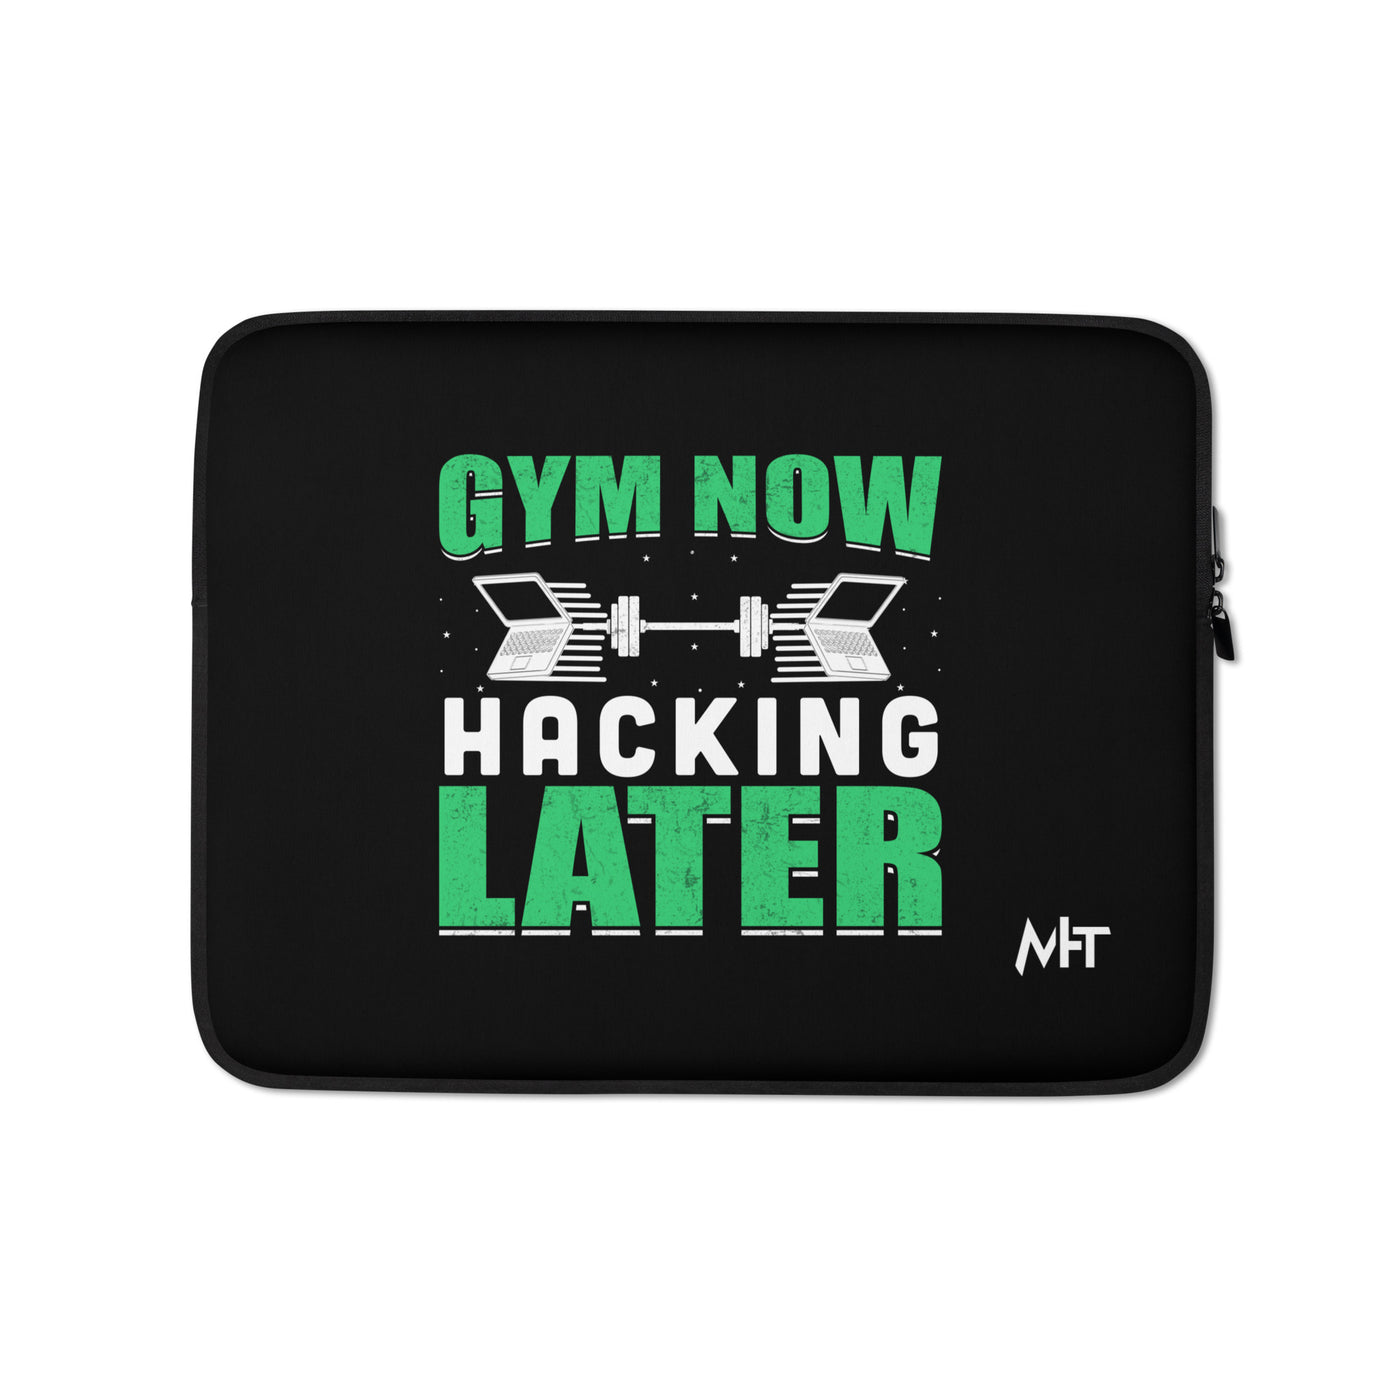 Gym now, hacking later - Laptop Sleeve